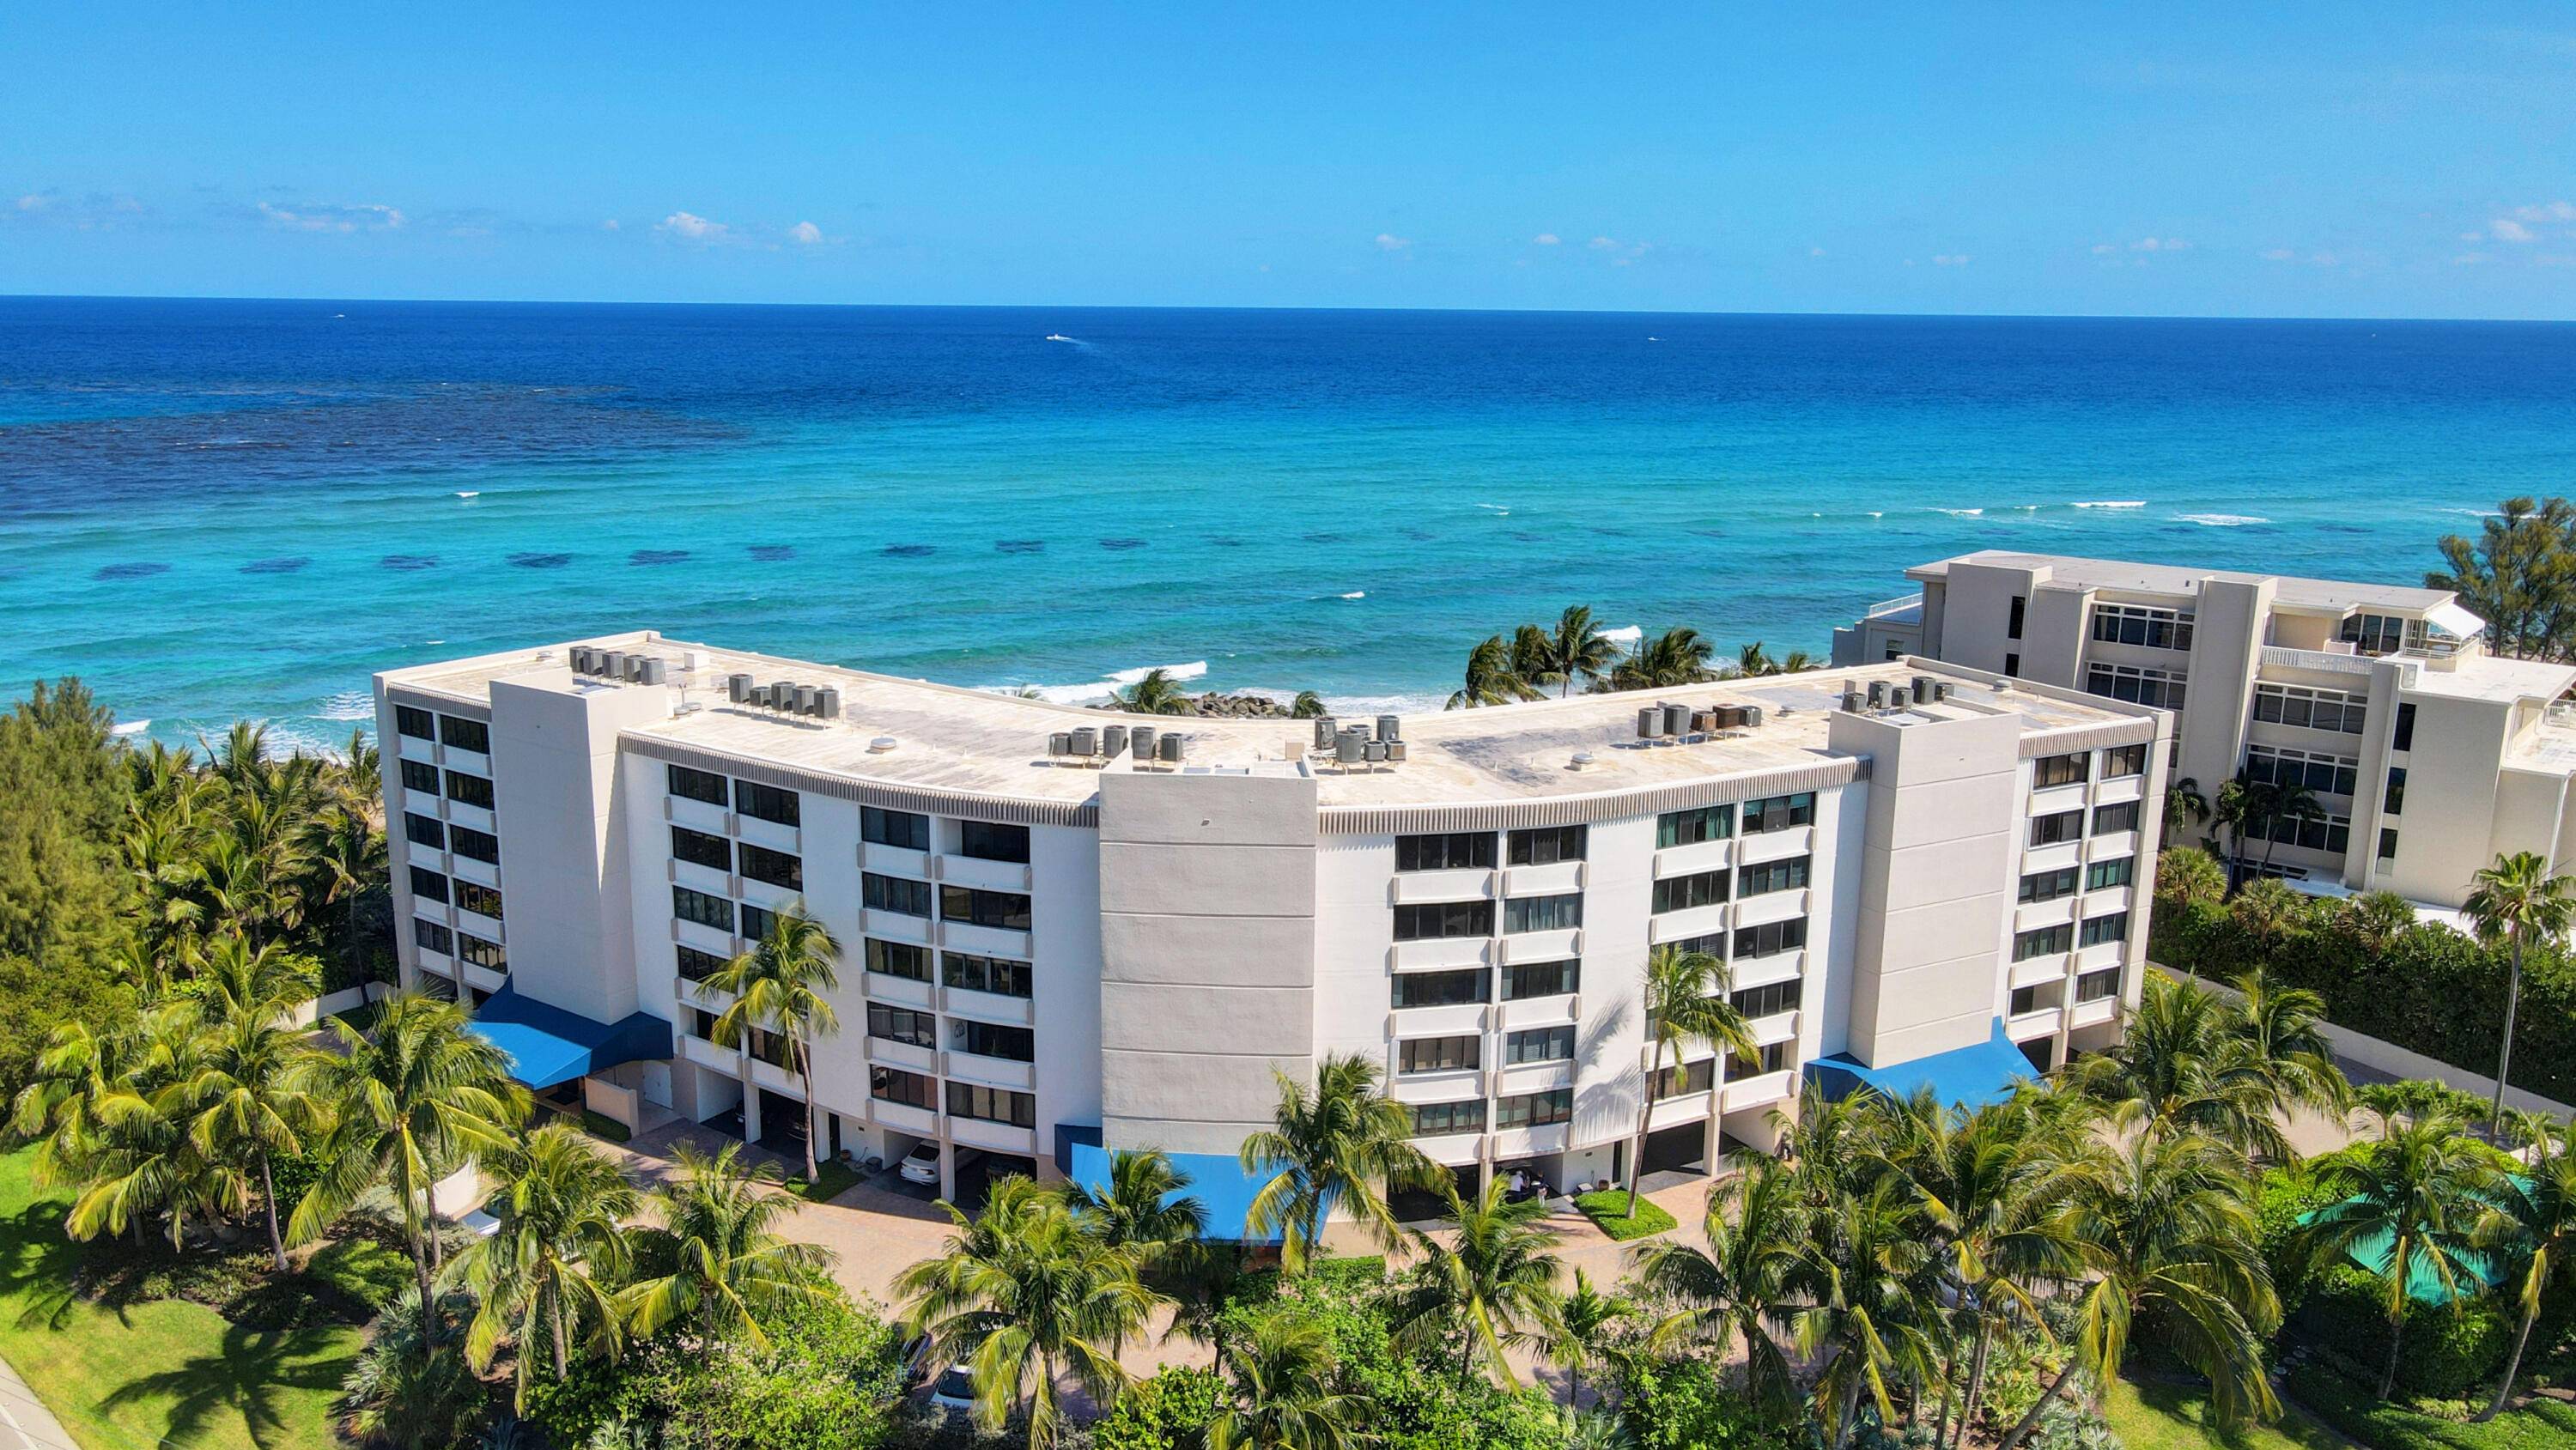 MUST SEE STUNNING DIRECT OCEANFRONT ; COMPLETELY RENOVATED, FURNISHED, 2 BEDROOM, 2 BATHROOM CONDO WITH SPECTACULAR PANORAMIC OCEAN VIEWS UNIT IS NOT LOCATED ON THE GROUND FLOOR.